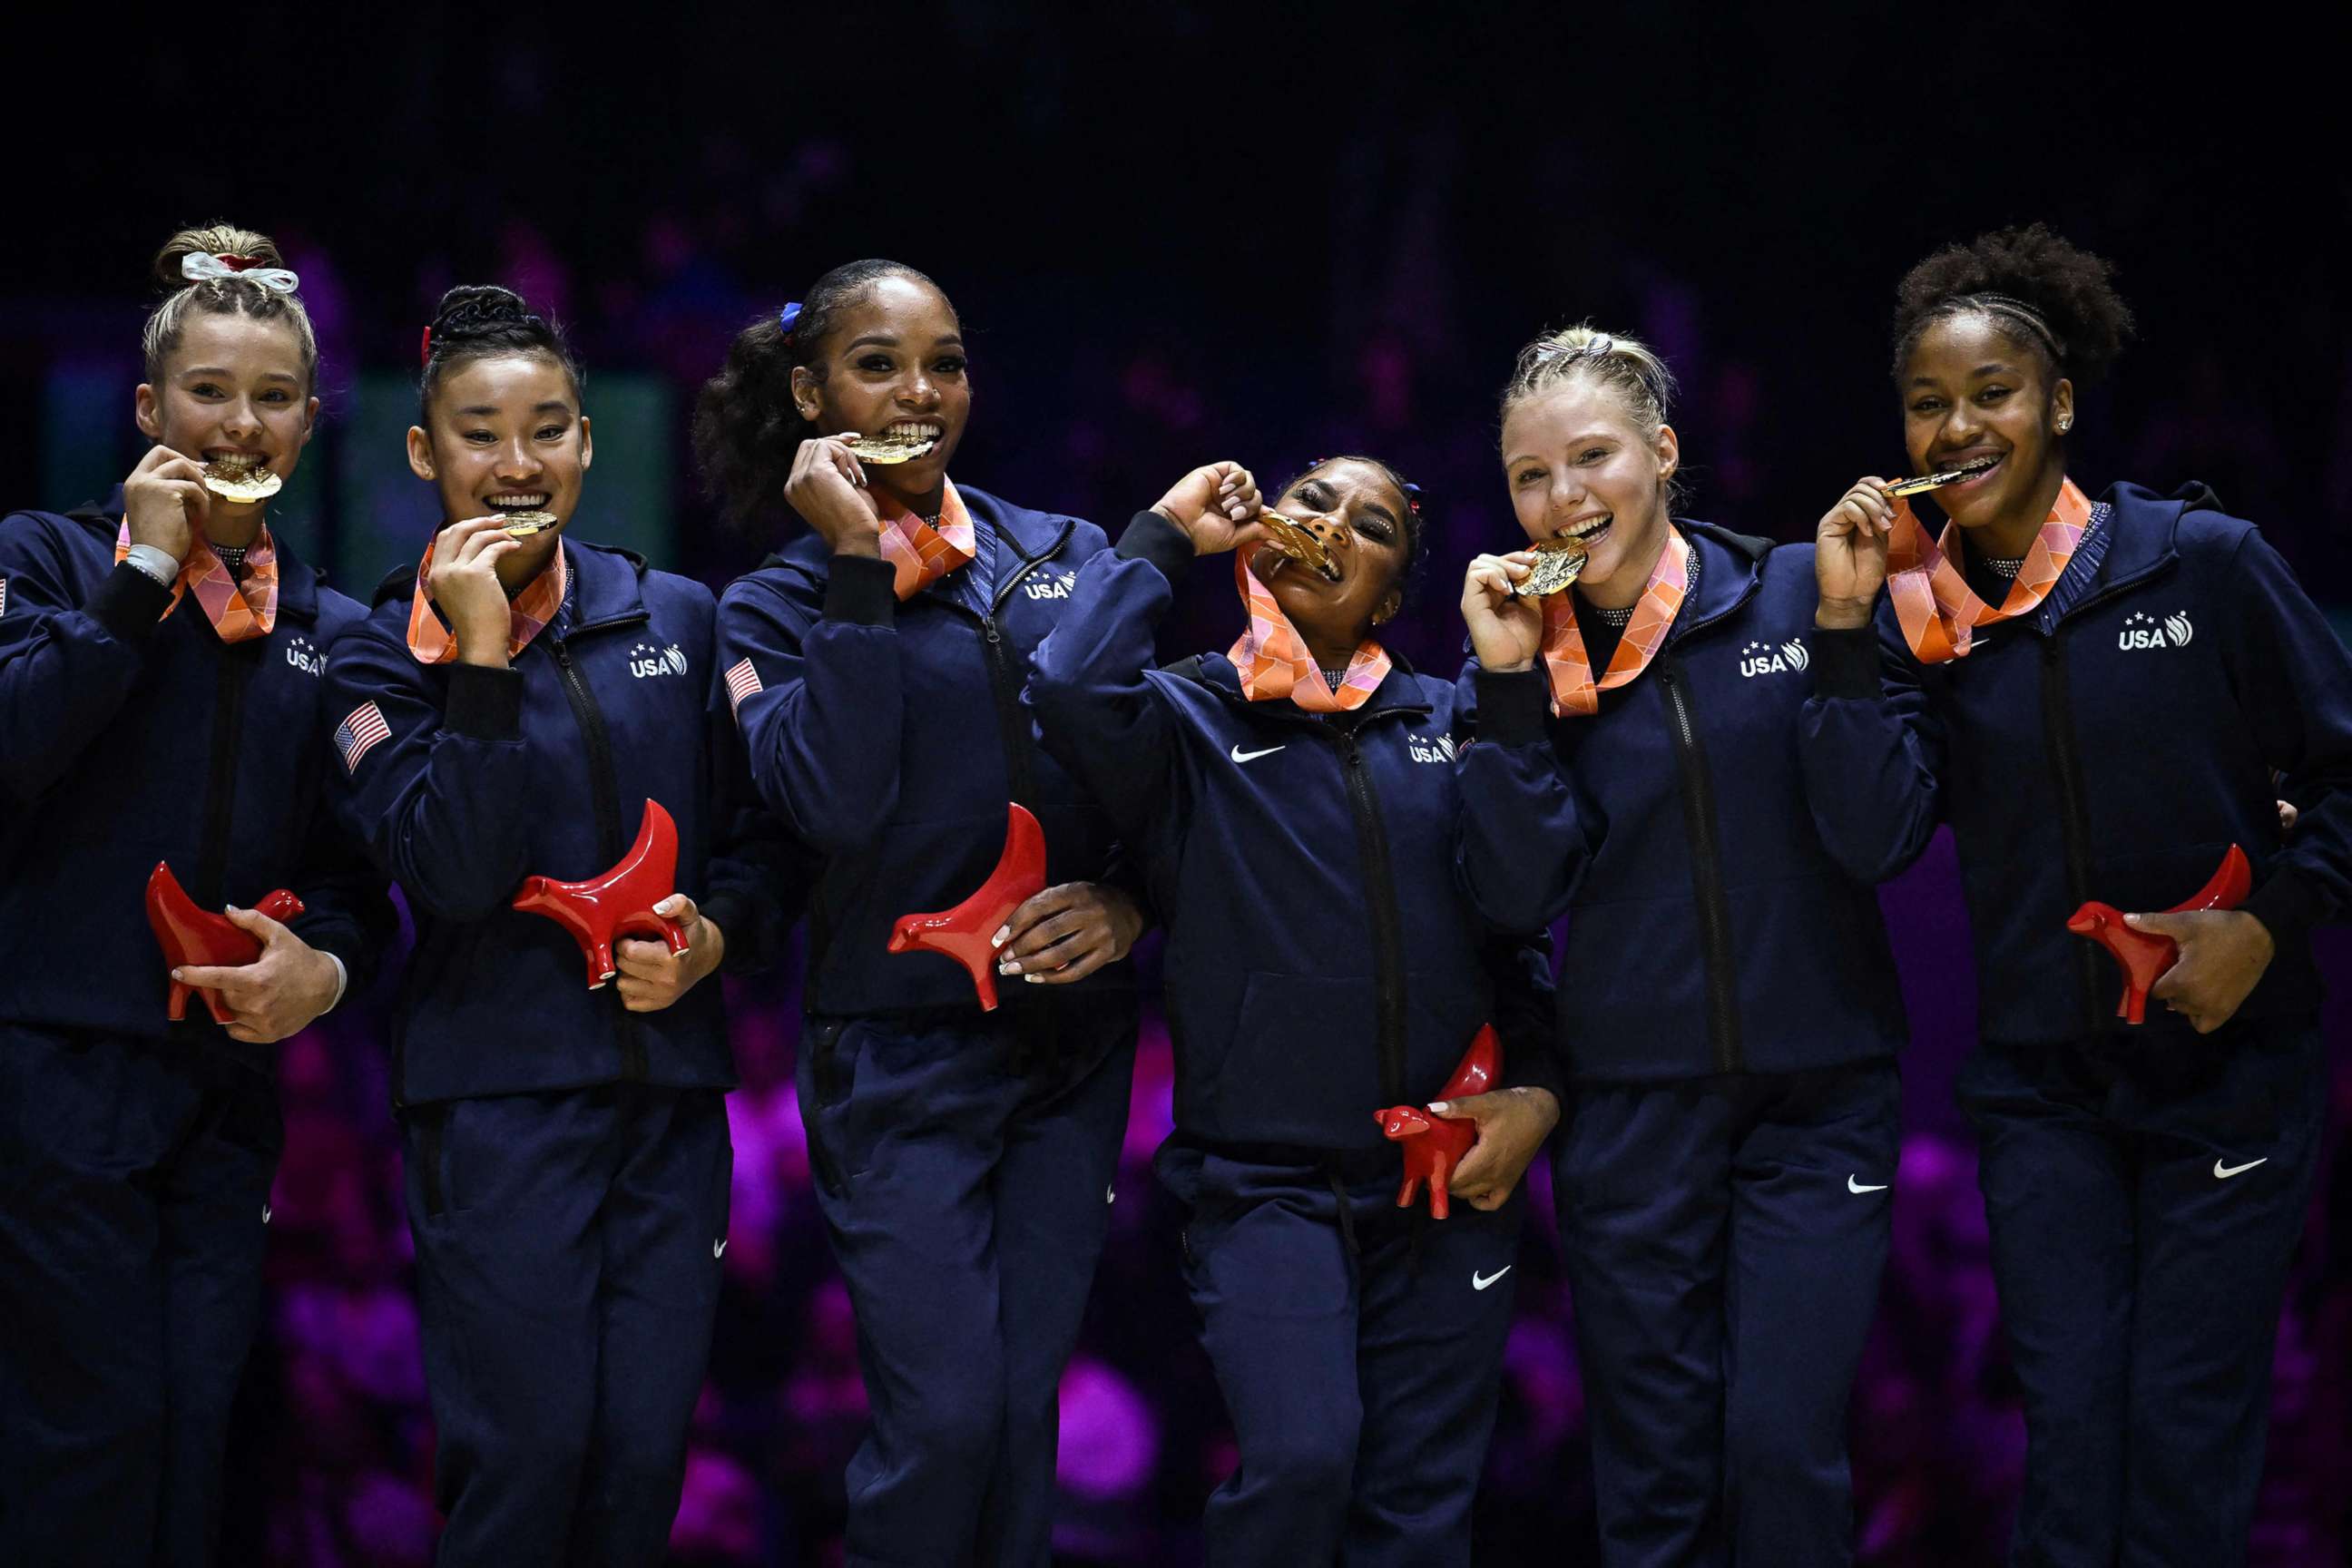 PHOTO: USA gymnasts celebrate with their gold medals after winning the women's team final at the World Gymnastics Championships, Nov. 1, 2022 in Liverpool, England.